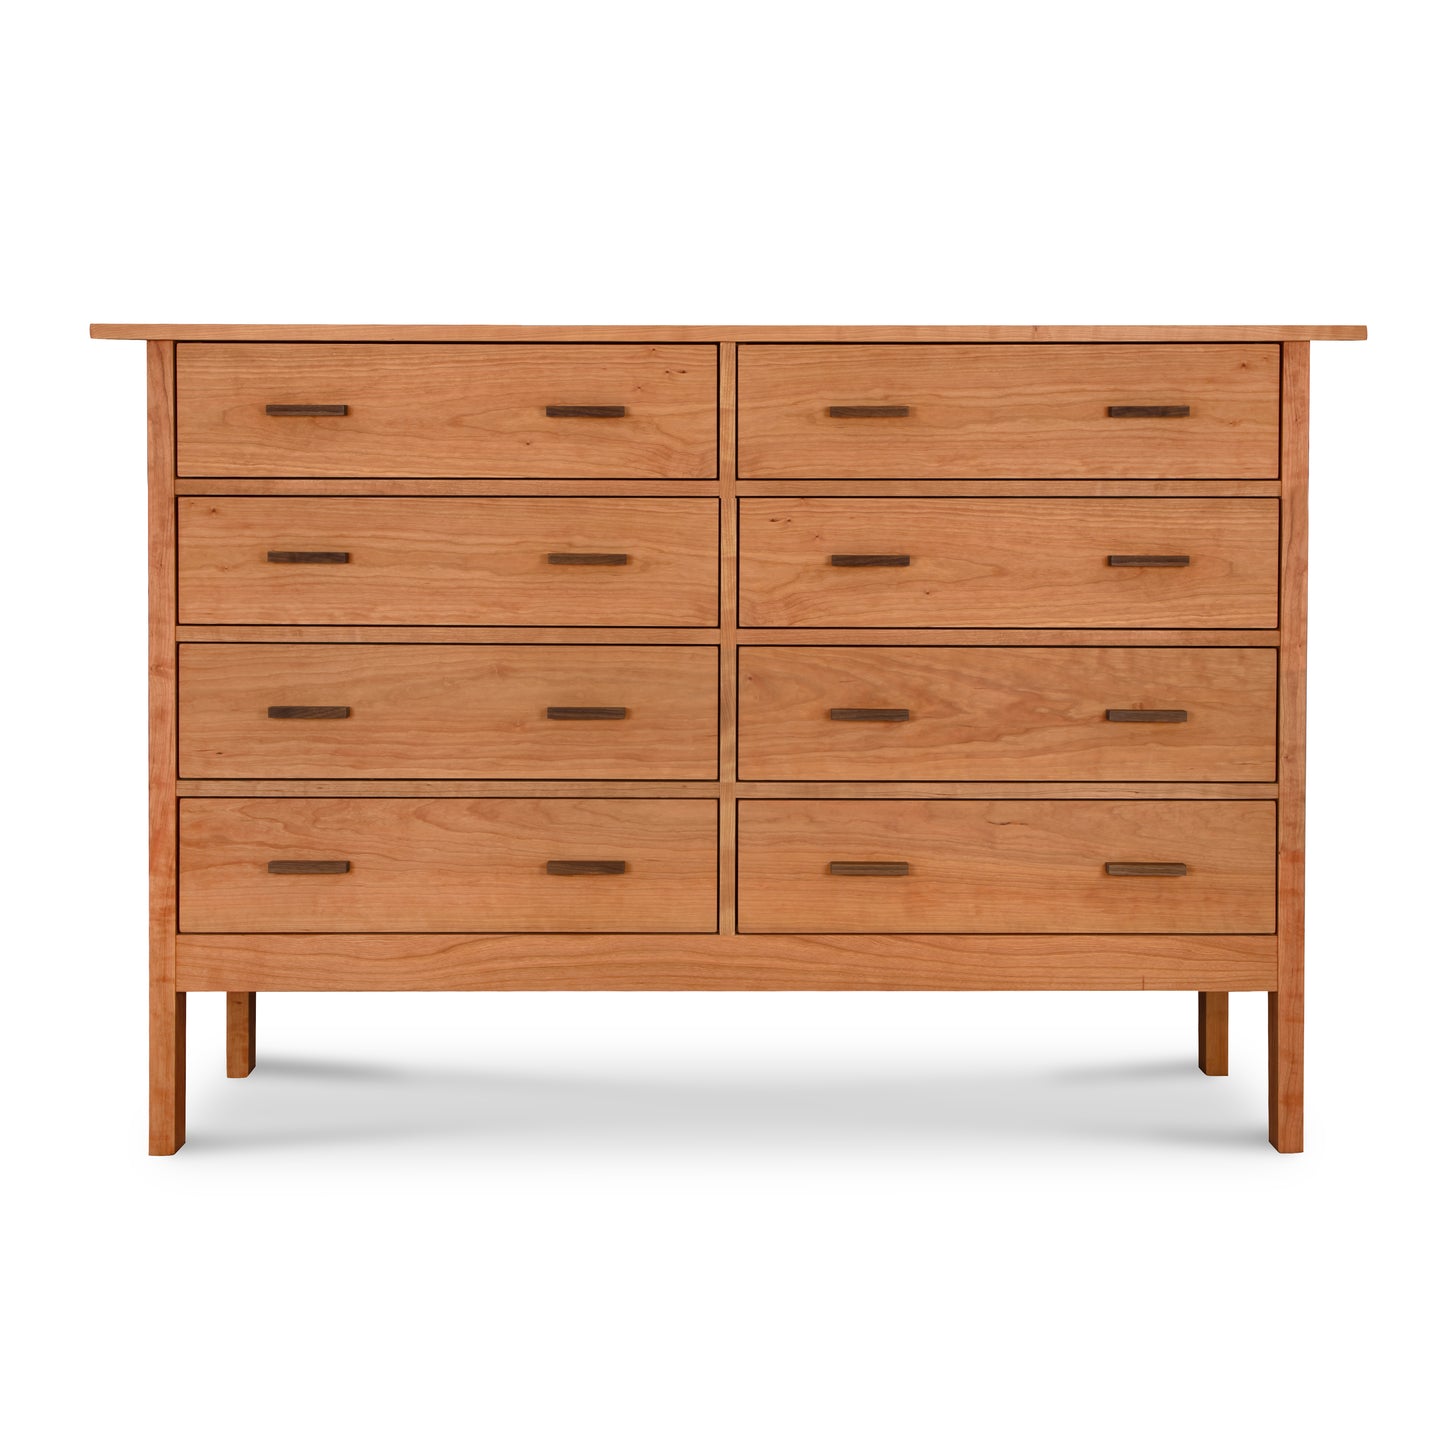 A Modern Craftsman 8-Drawer Dresser by Vermont Furniture Designs, featuring a minimalist design with natural Cherry wood and standing against a white background.